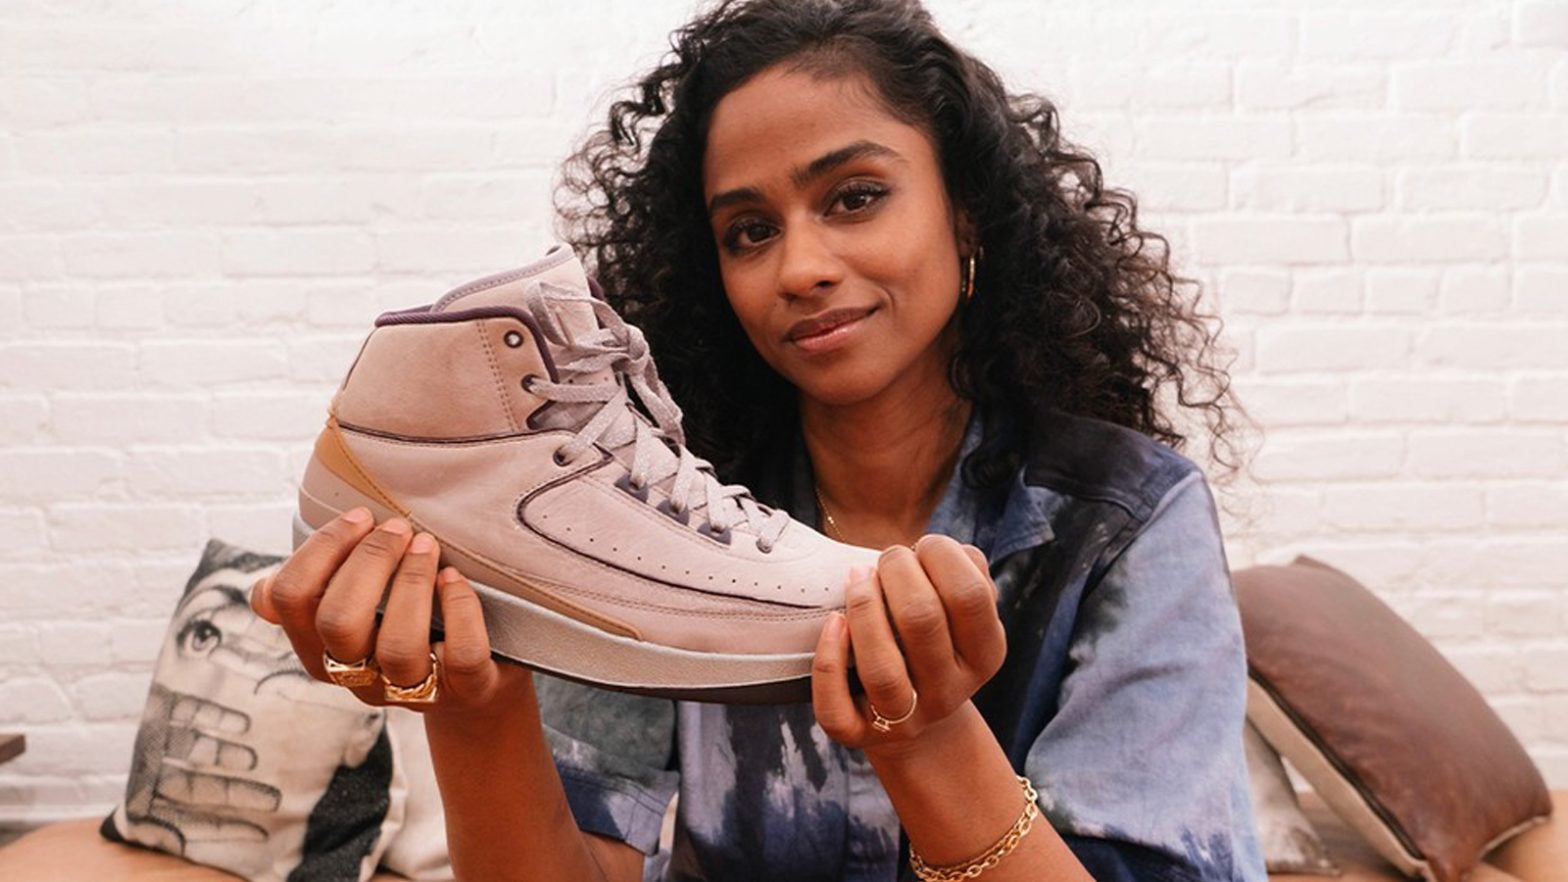 eBay Celebrates Women's History Month With Capsule Honoring Top Women In Sneaker Culture